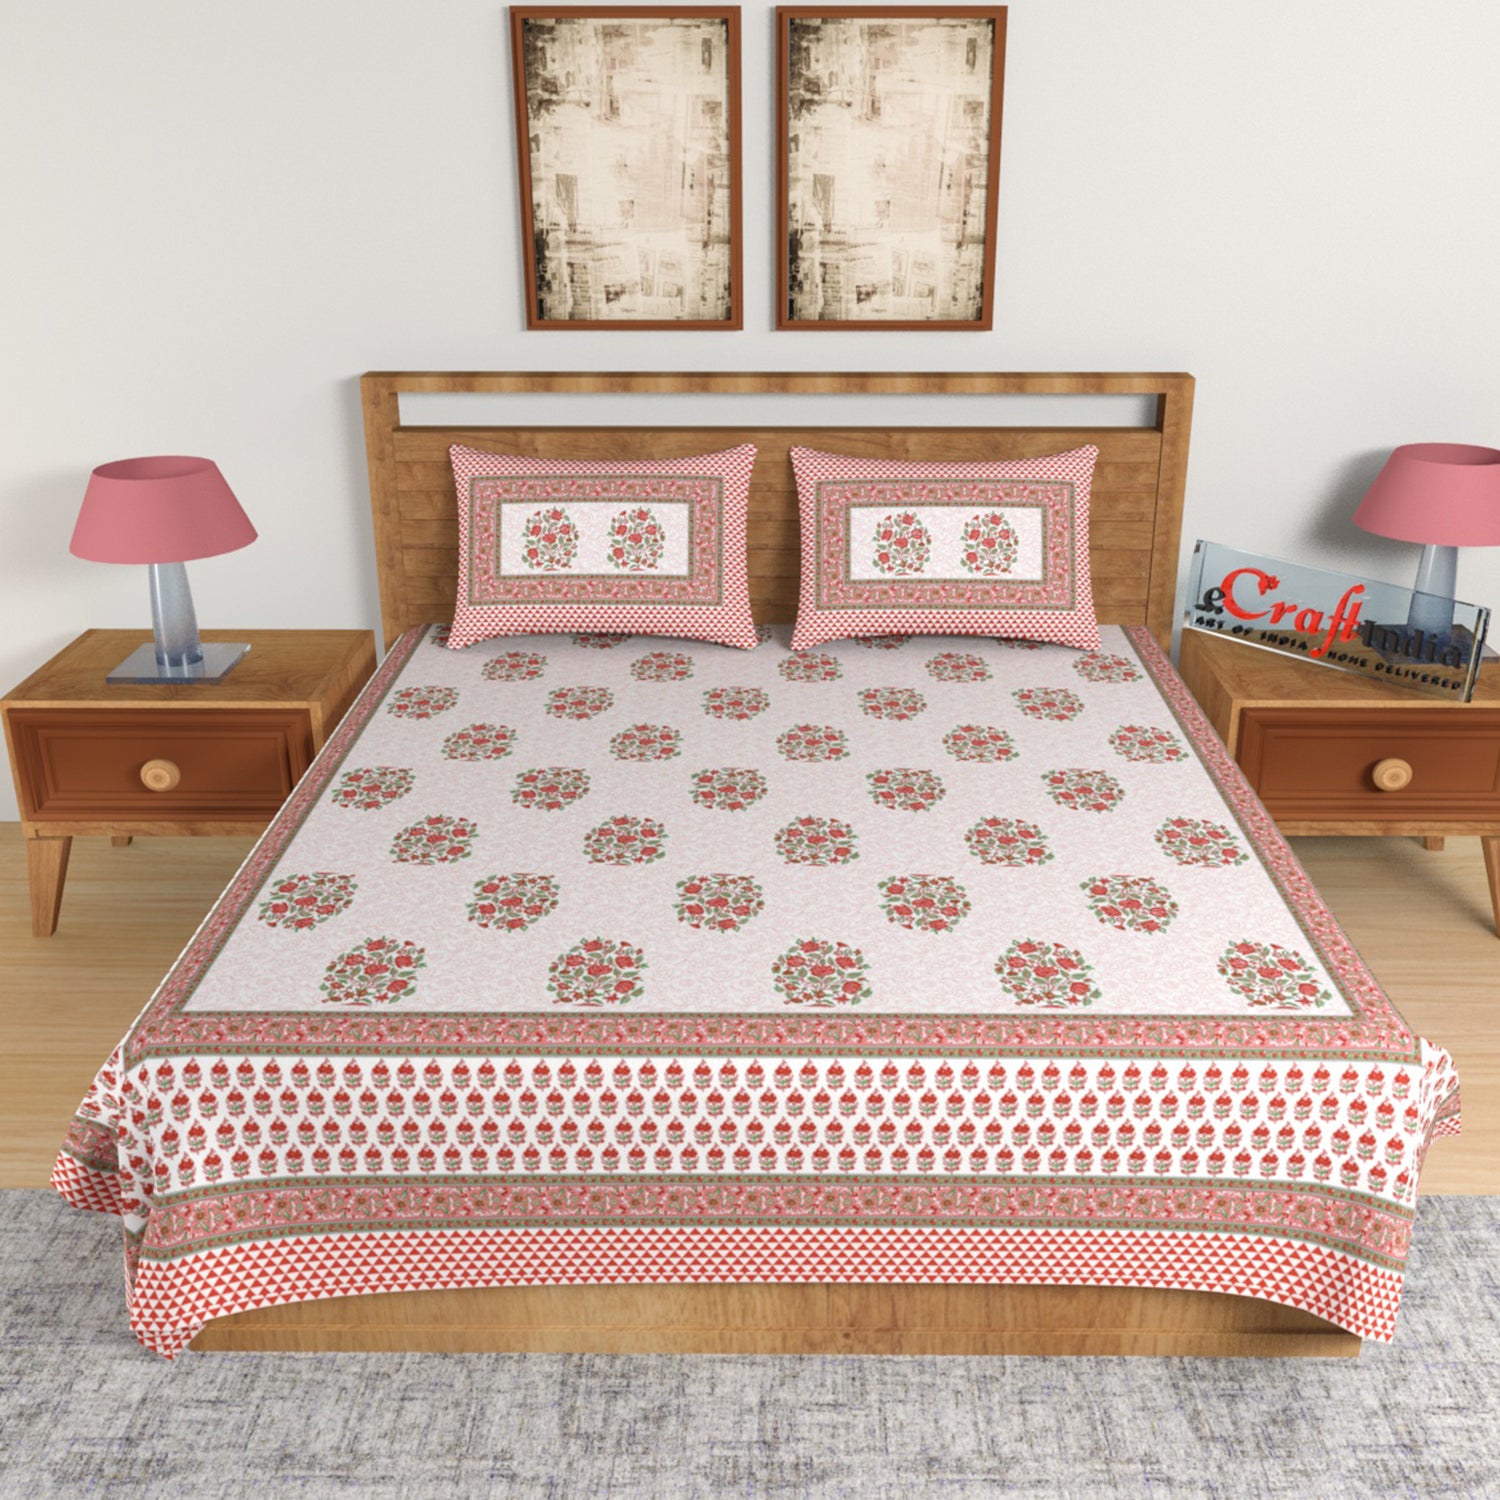 180 TC Pure Cotton Premium Ethnic Jaipuri Floral Print King Size Double Bed Bedsheet (108 In x 108 In) with 2 pillow cover - Pink 1